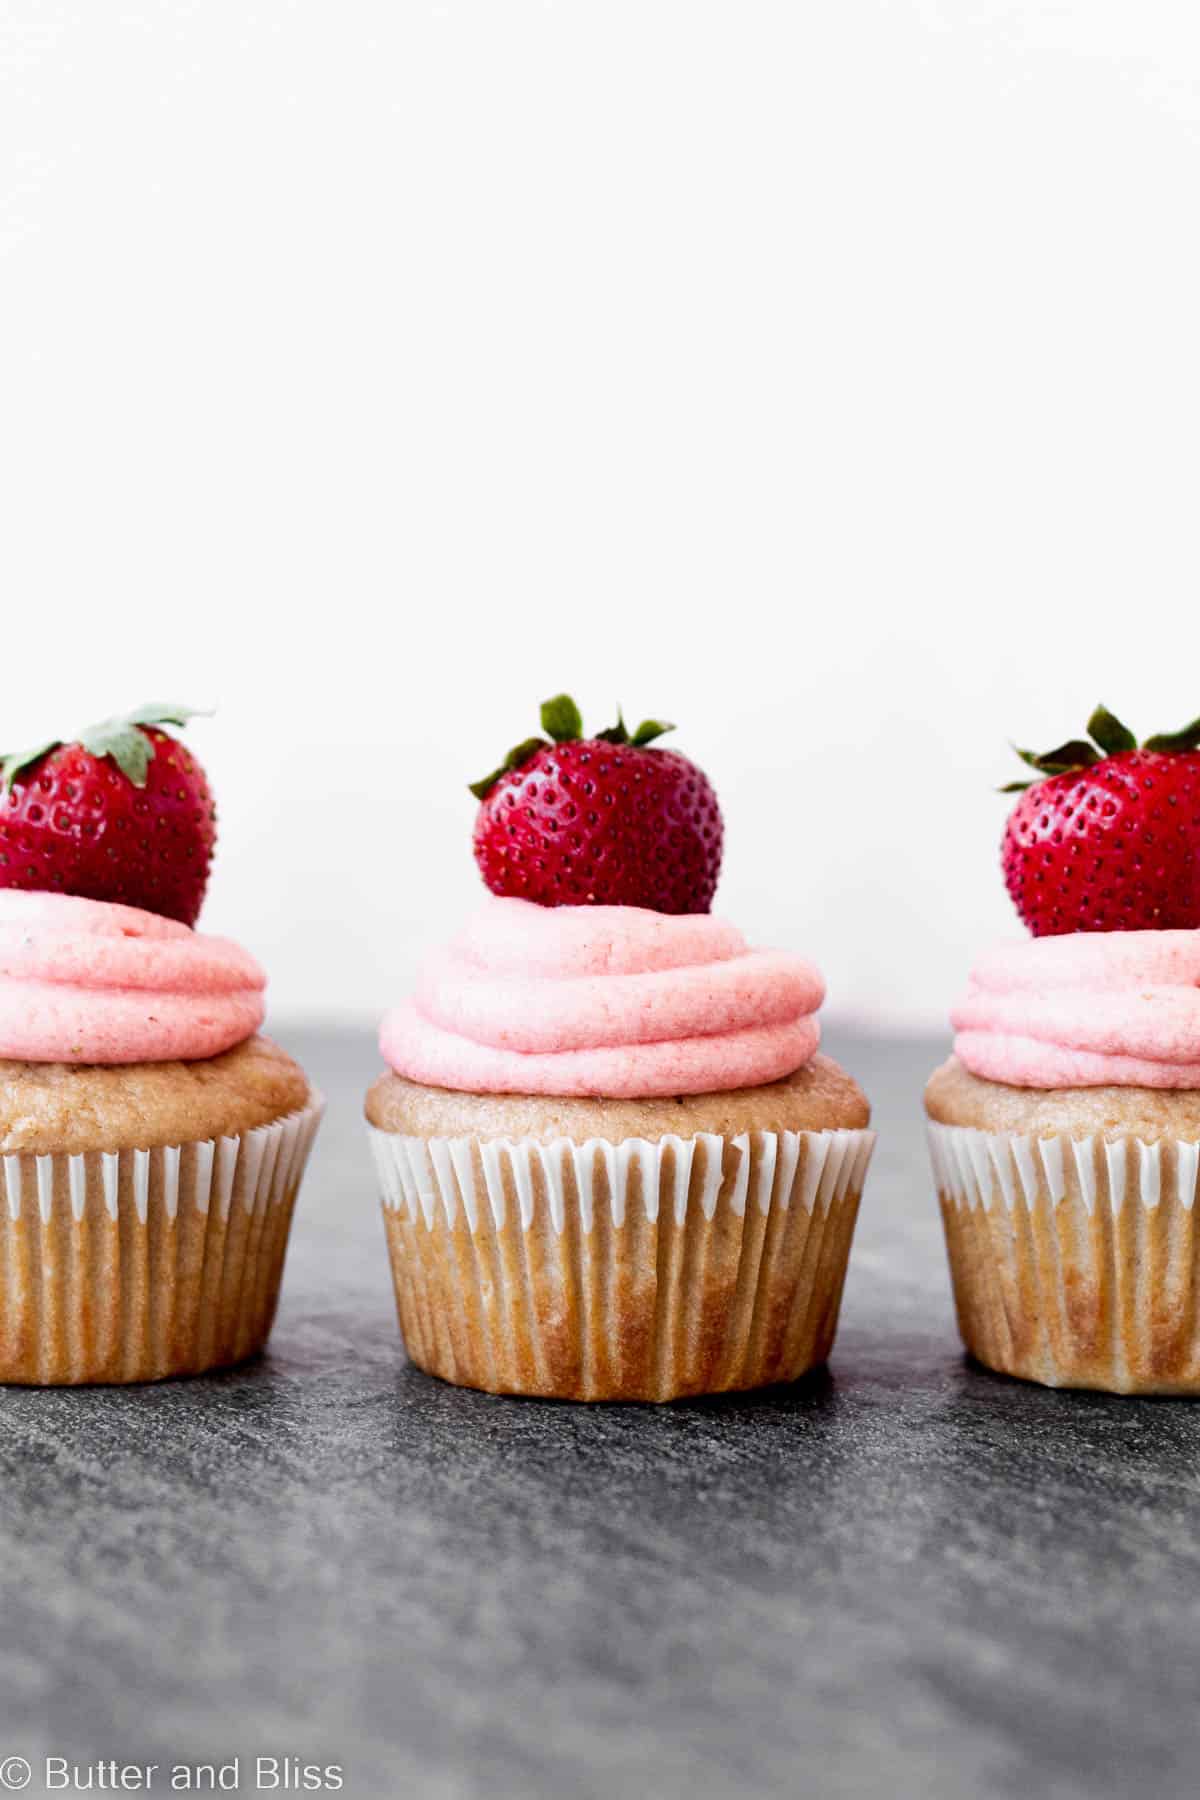 A row of three pretty little strawberry cupcakes with strawberry garnish.